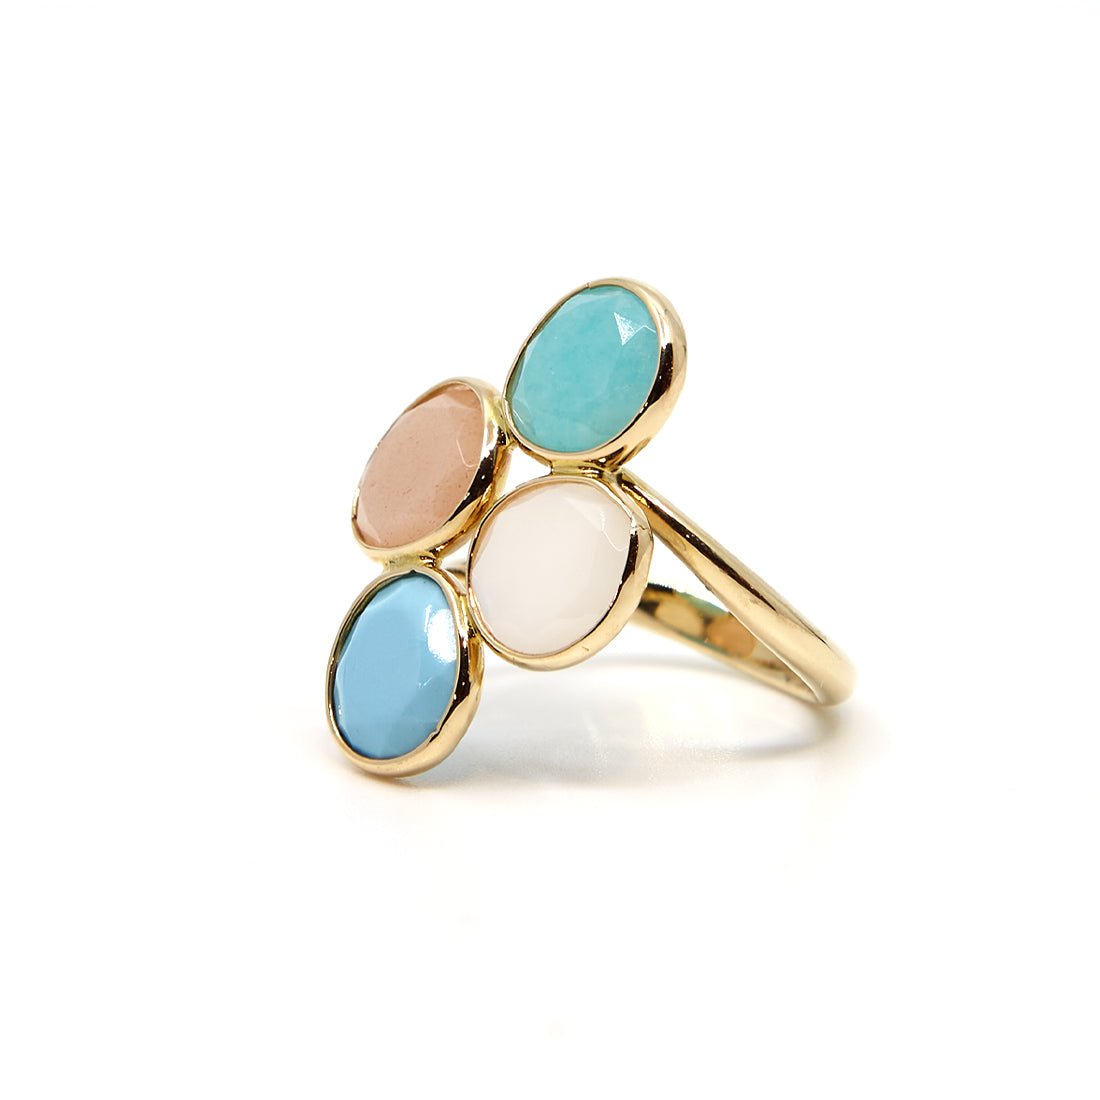 Yellow gold ring with turquoise, amazonite and moonstone